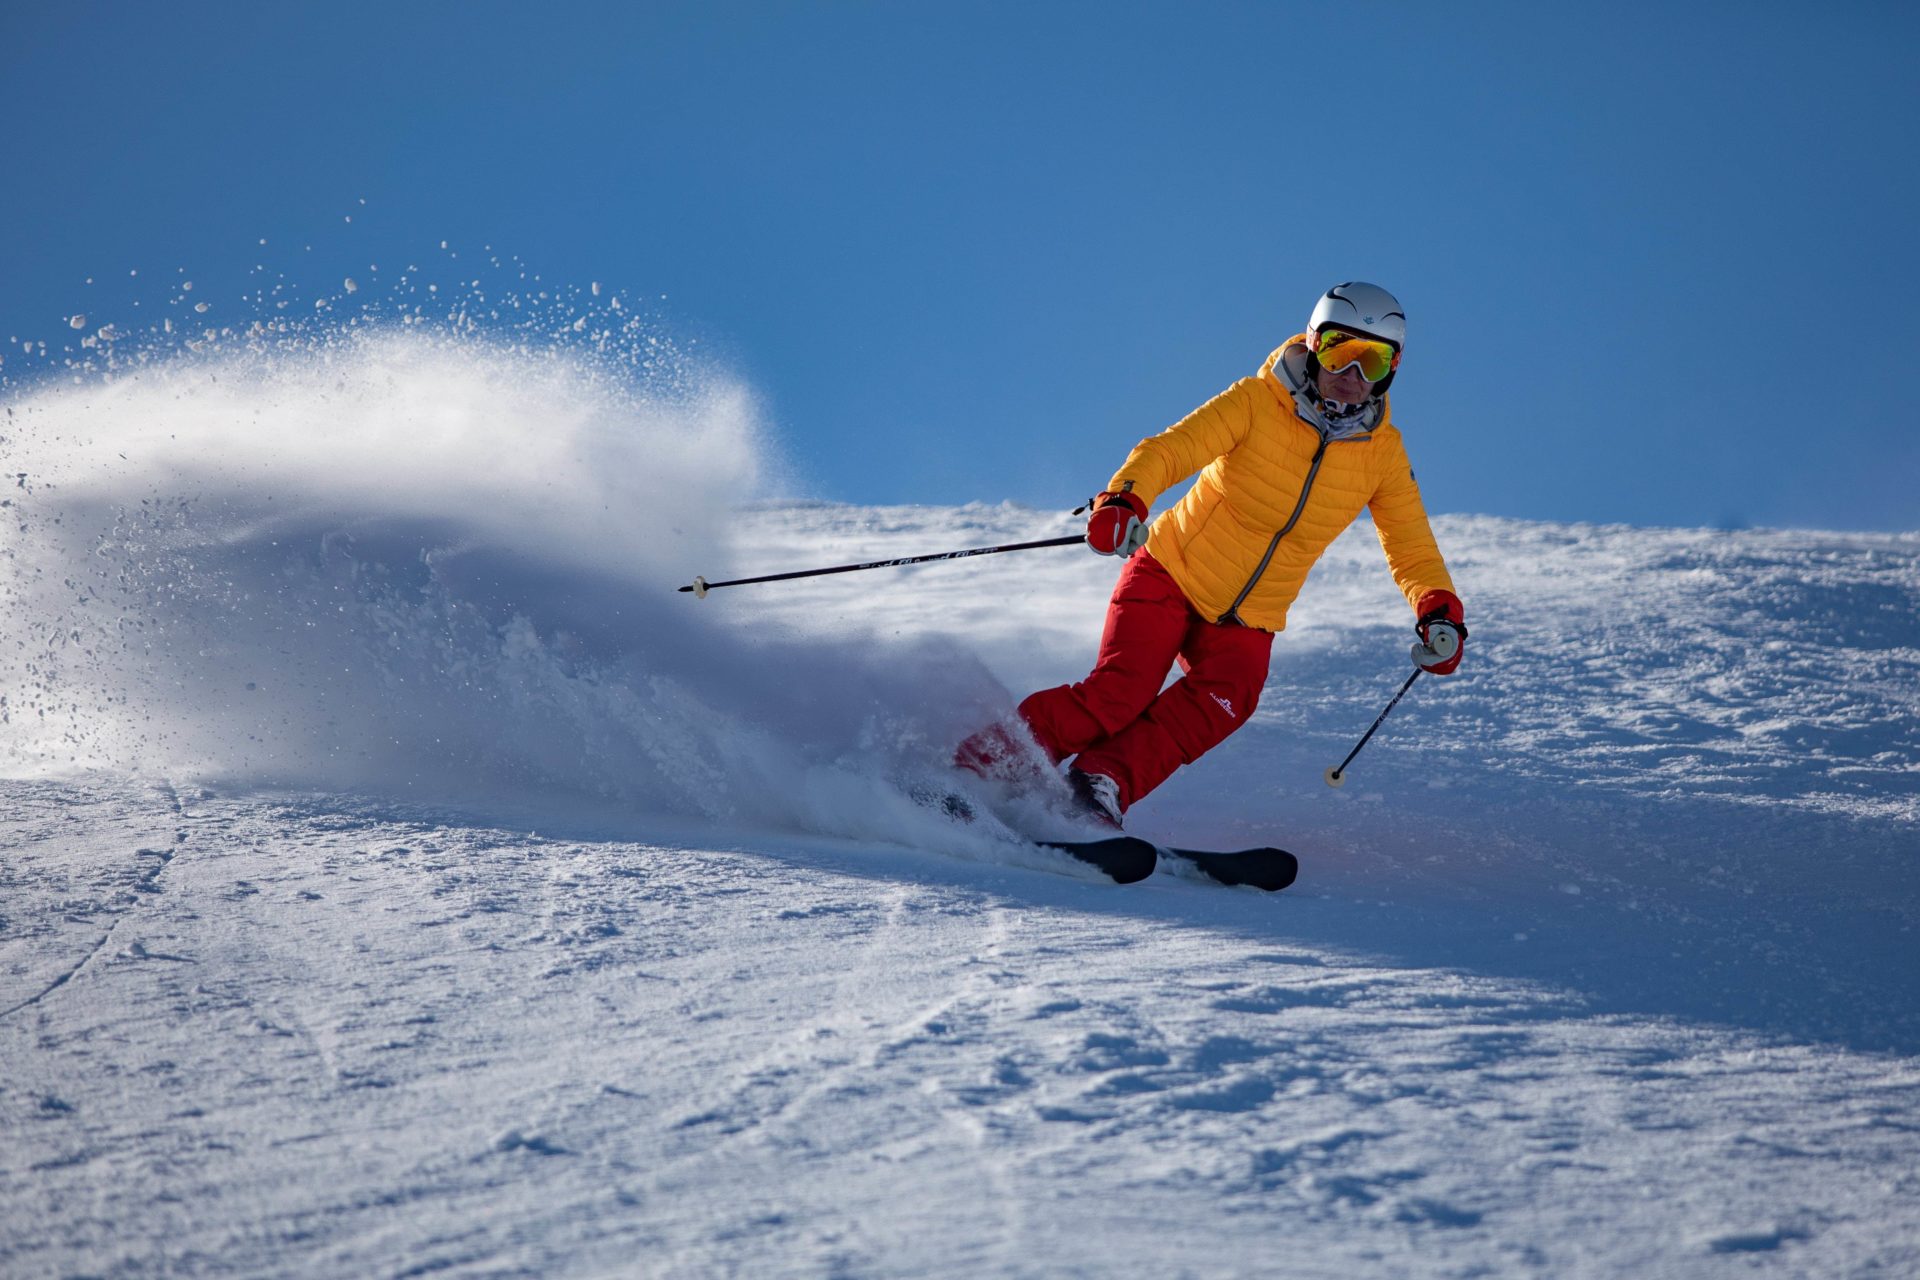 The Experts for Skiing Accidents